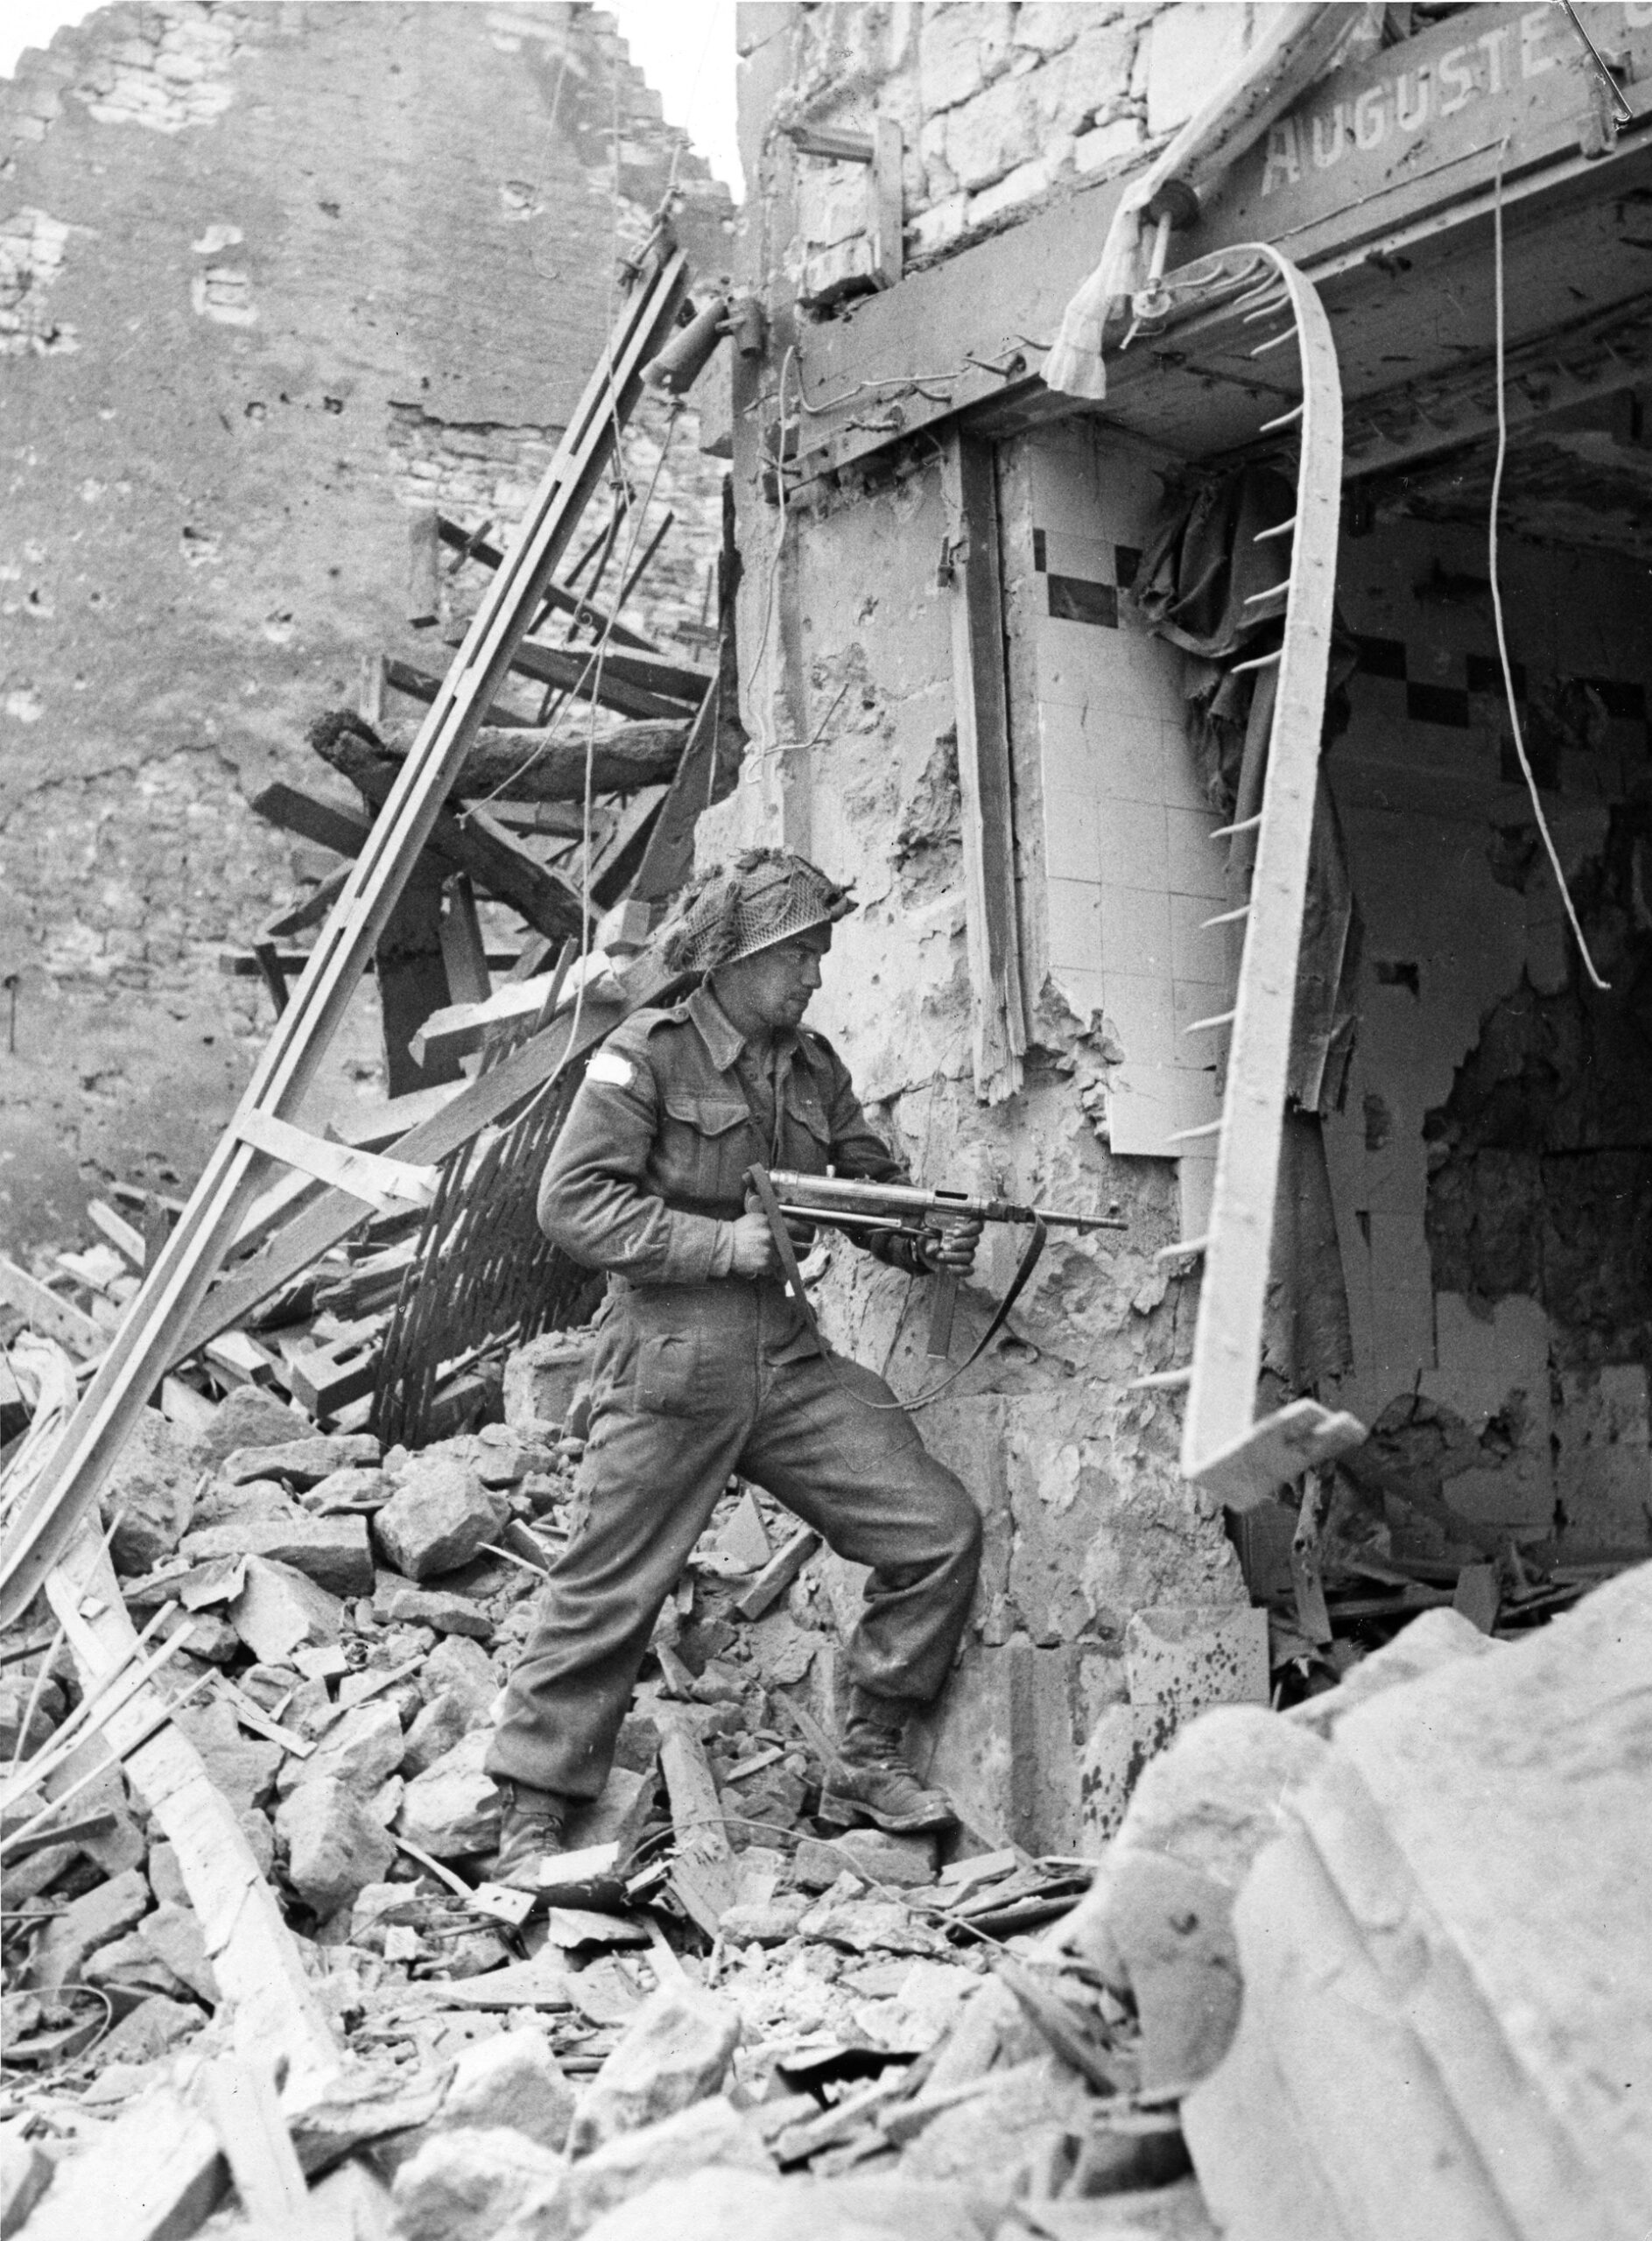 A soldier of the 3rd Canadian Infantry Division, armed with a German MP 40 submachine gun that he likely found on the battlefield, checks for signs of life in a demolished building in Normandy. The Canadians landed 14,000 men at Juno Beach on June 6, 1944, while another 1,000 came in by parachute and glider.